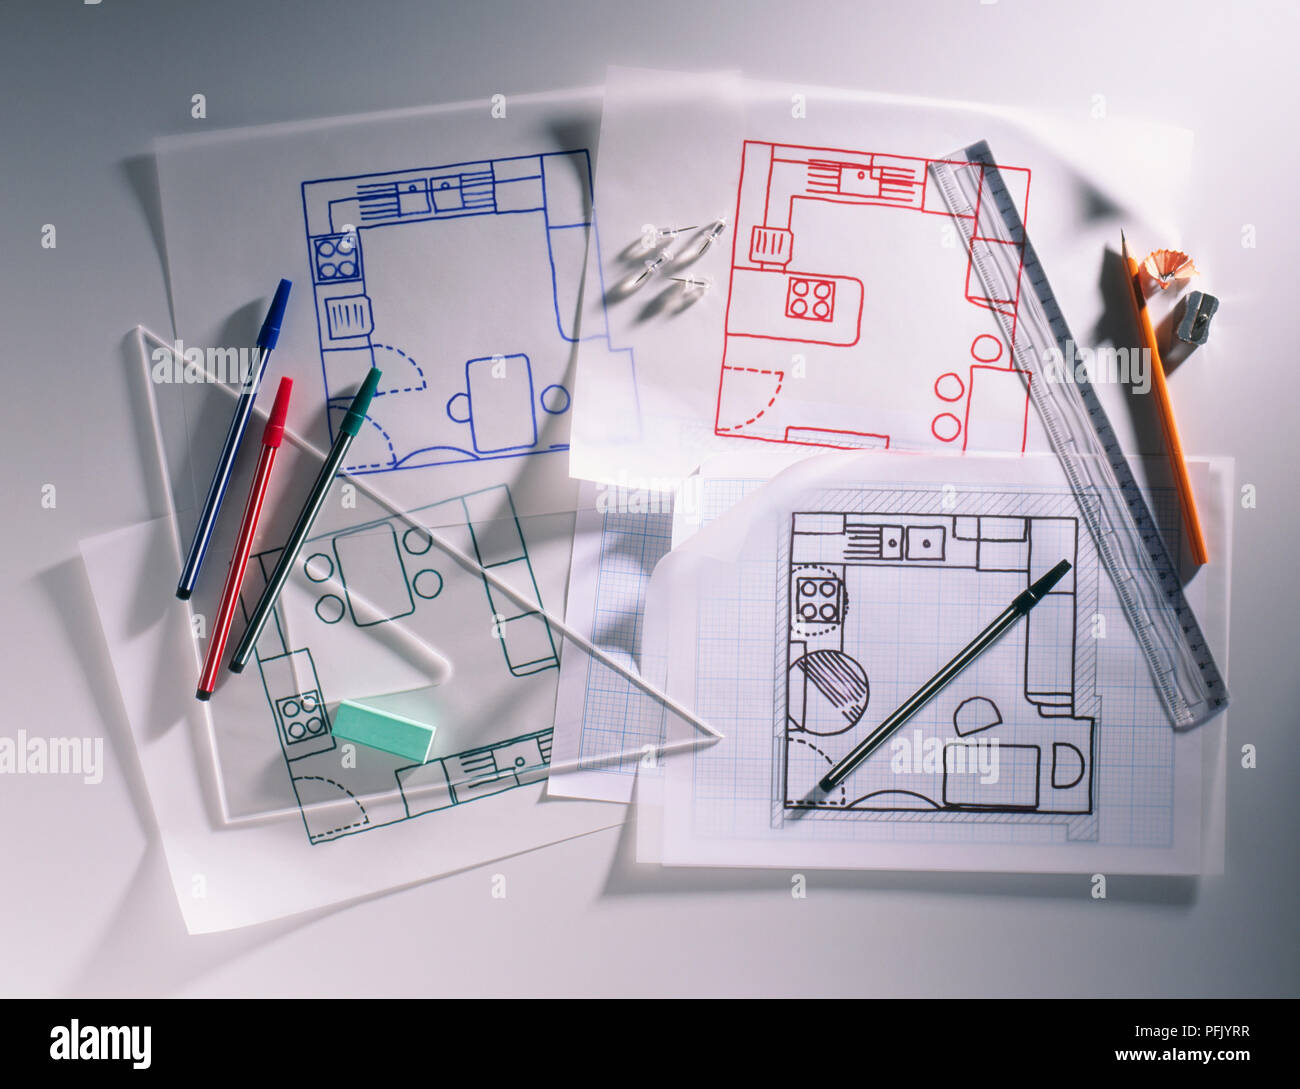 Four designs for a kitchen with drawing materials on top, including set square, ruler, pens Stock Photo